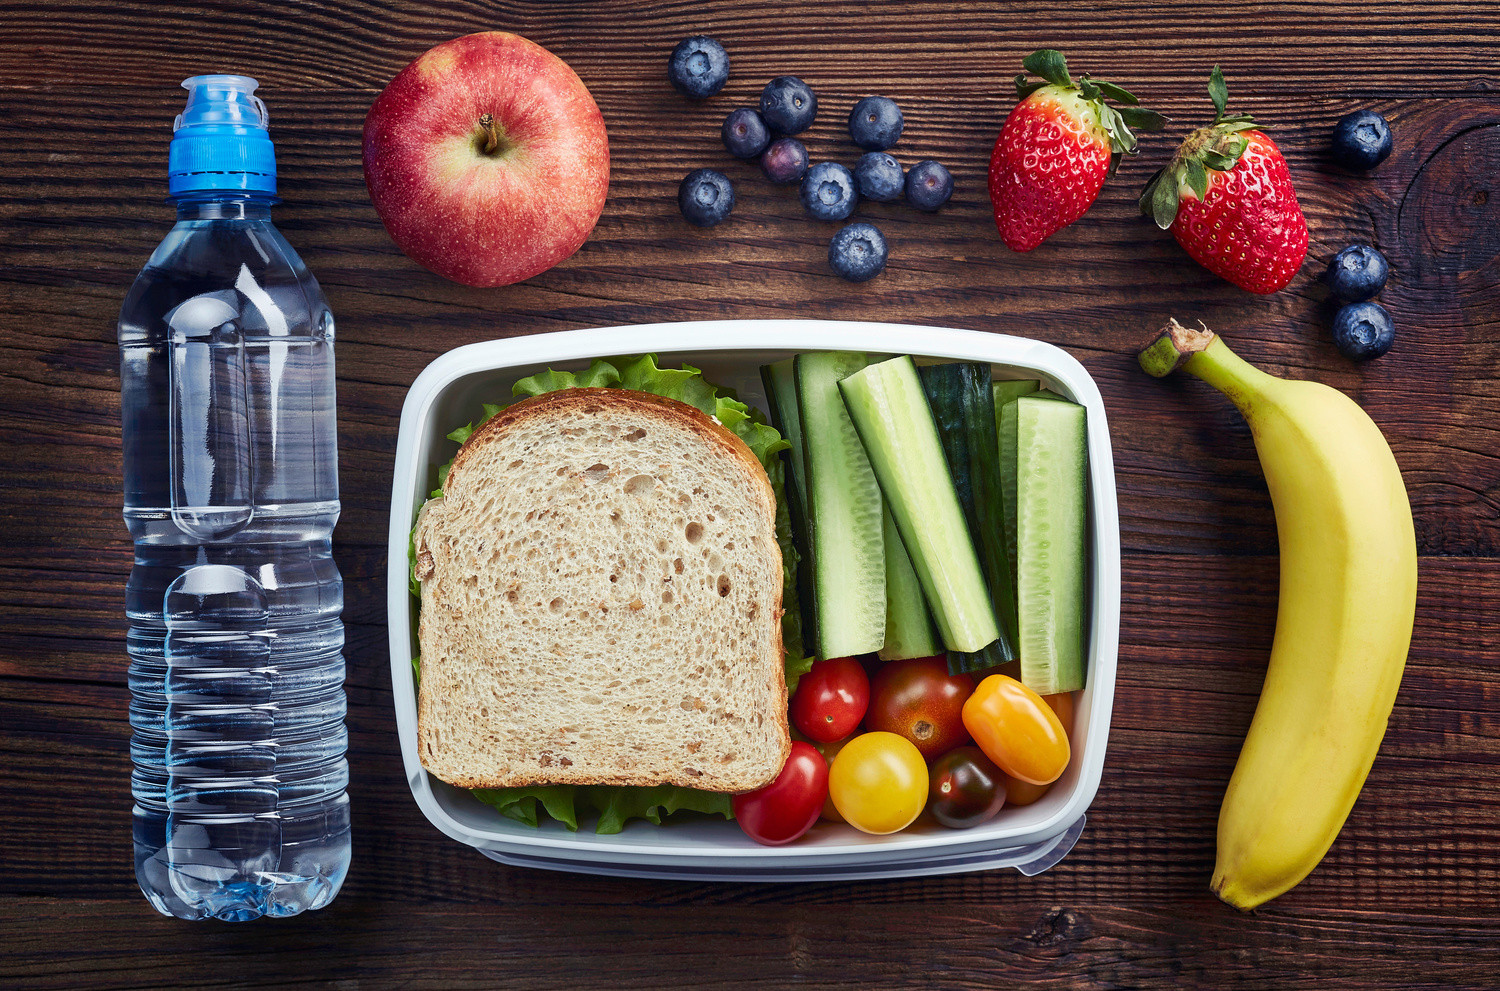 Healthy Kids Lunches
 Ways for Parents to Improve Their Children’s School